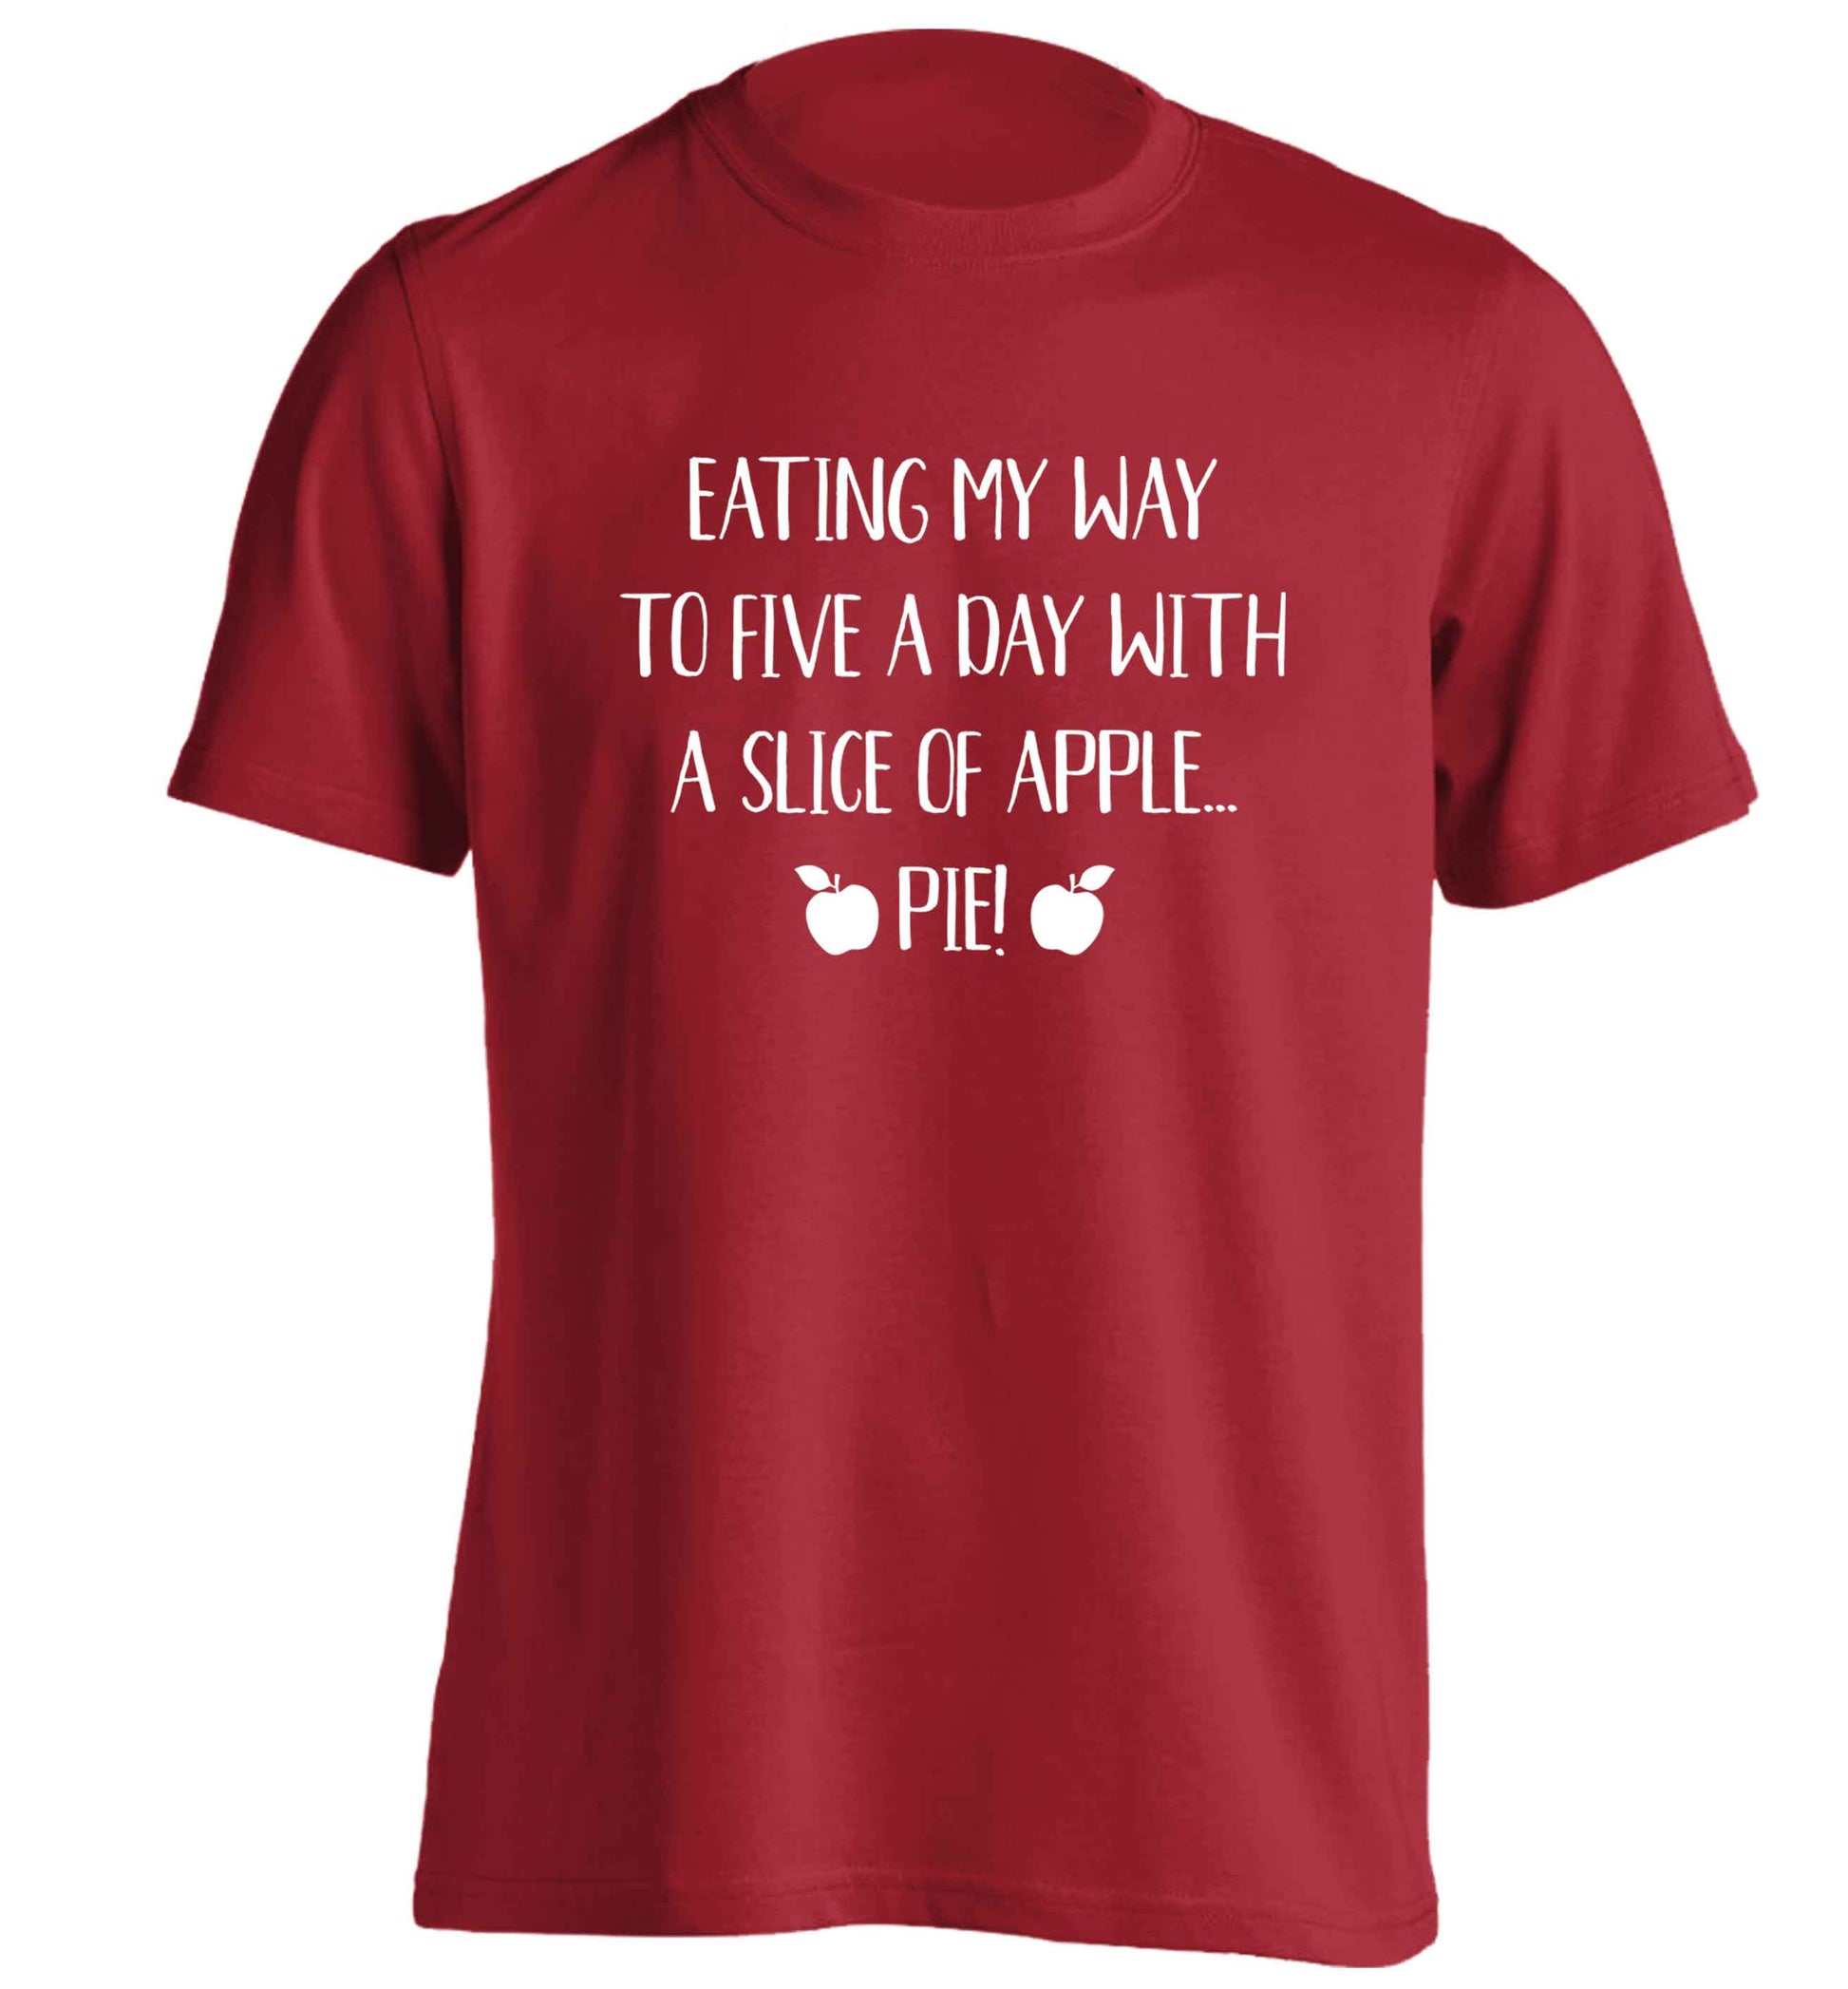 Eating my way to five a day with a slice of apple pie adults unisex red Tshirt 2XL